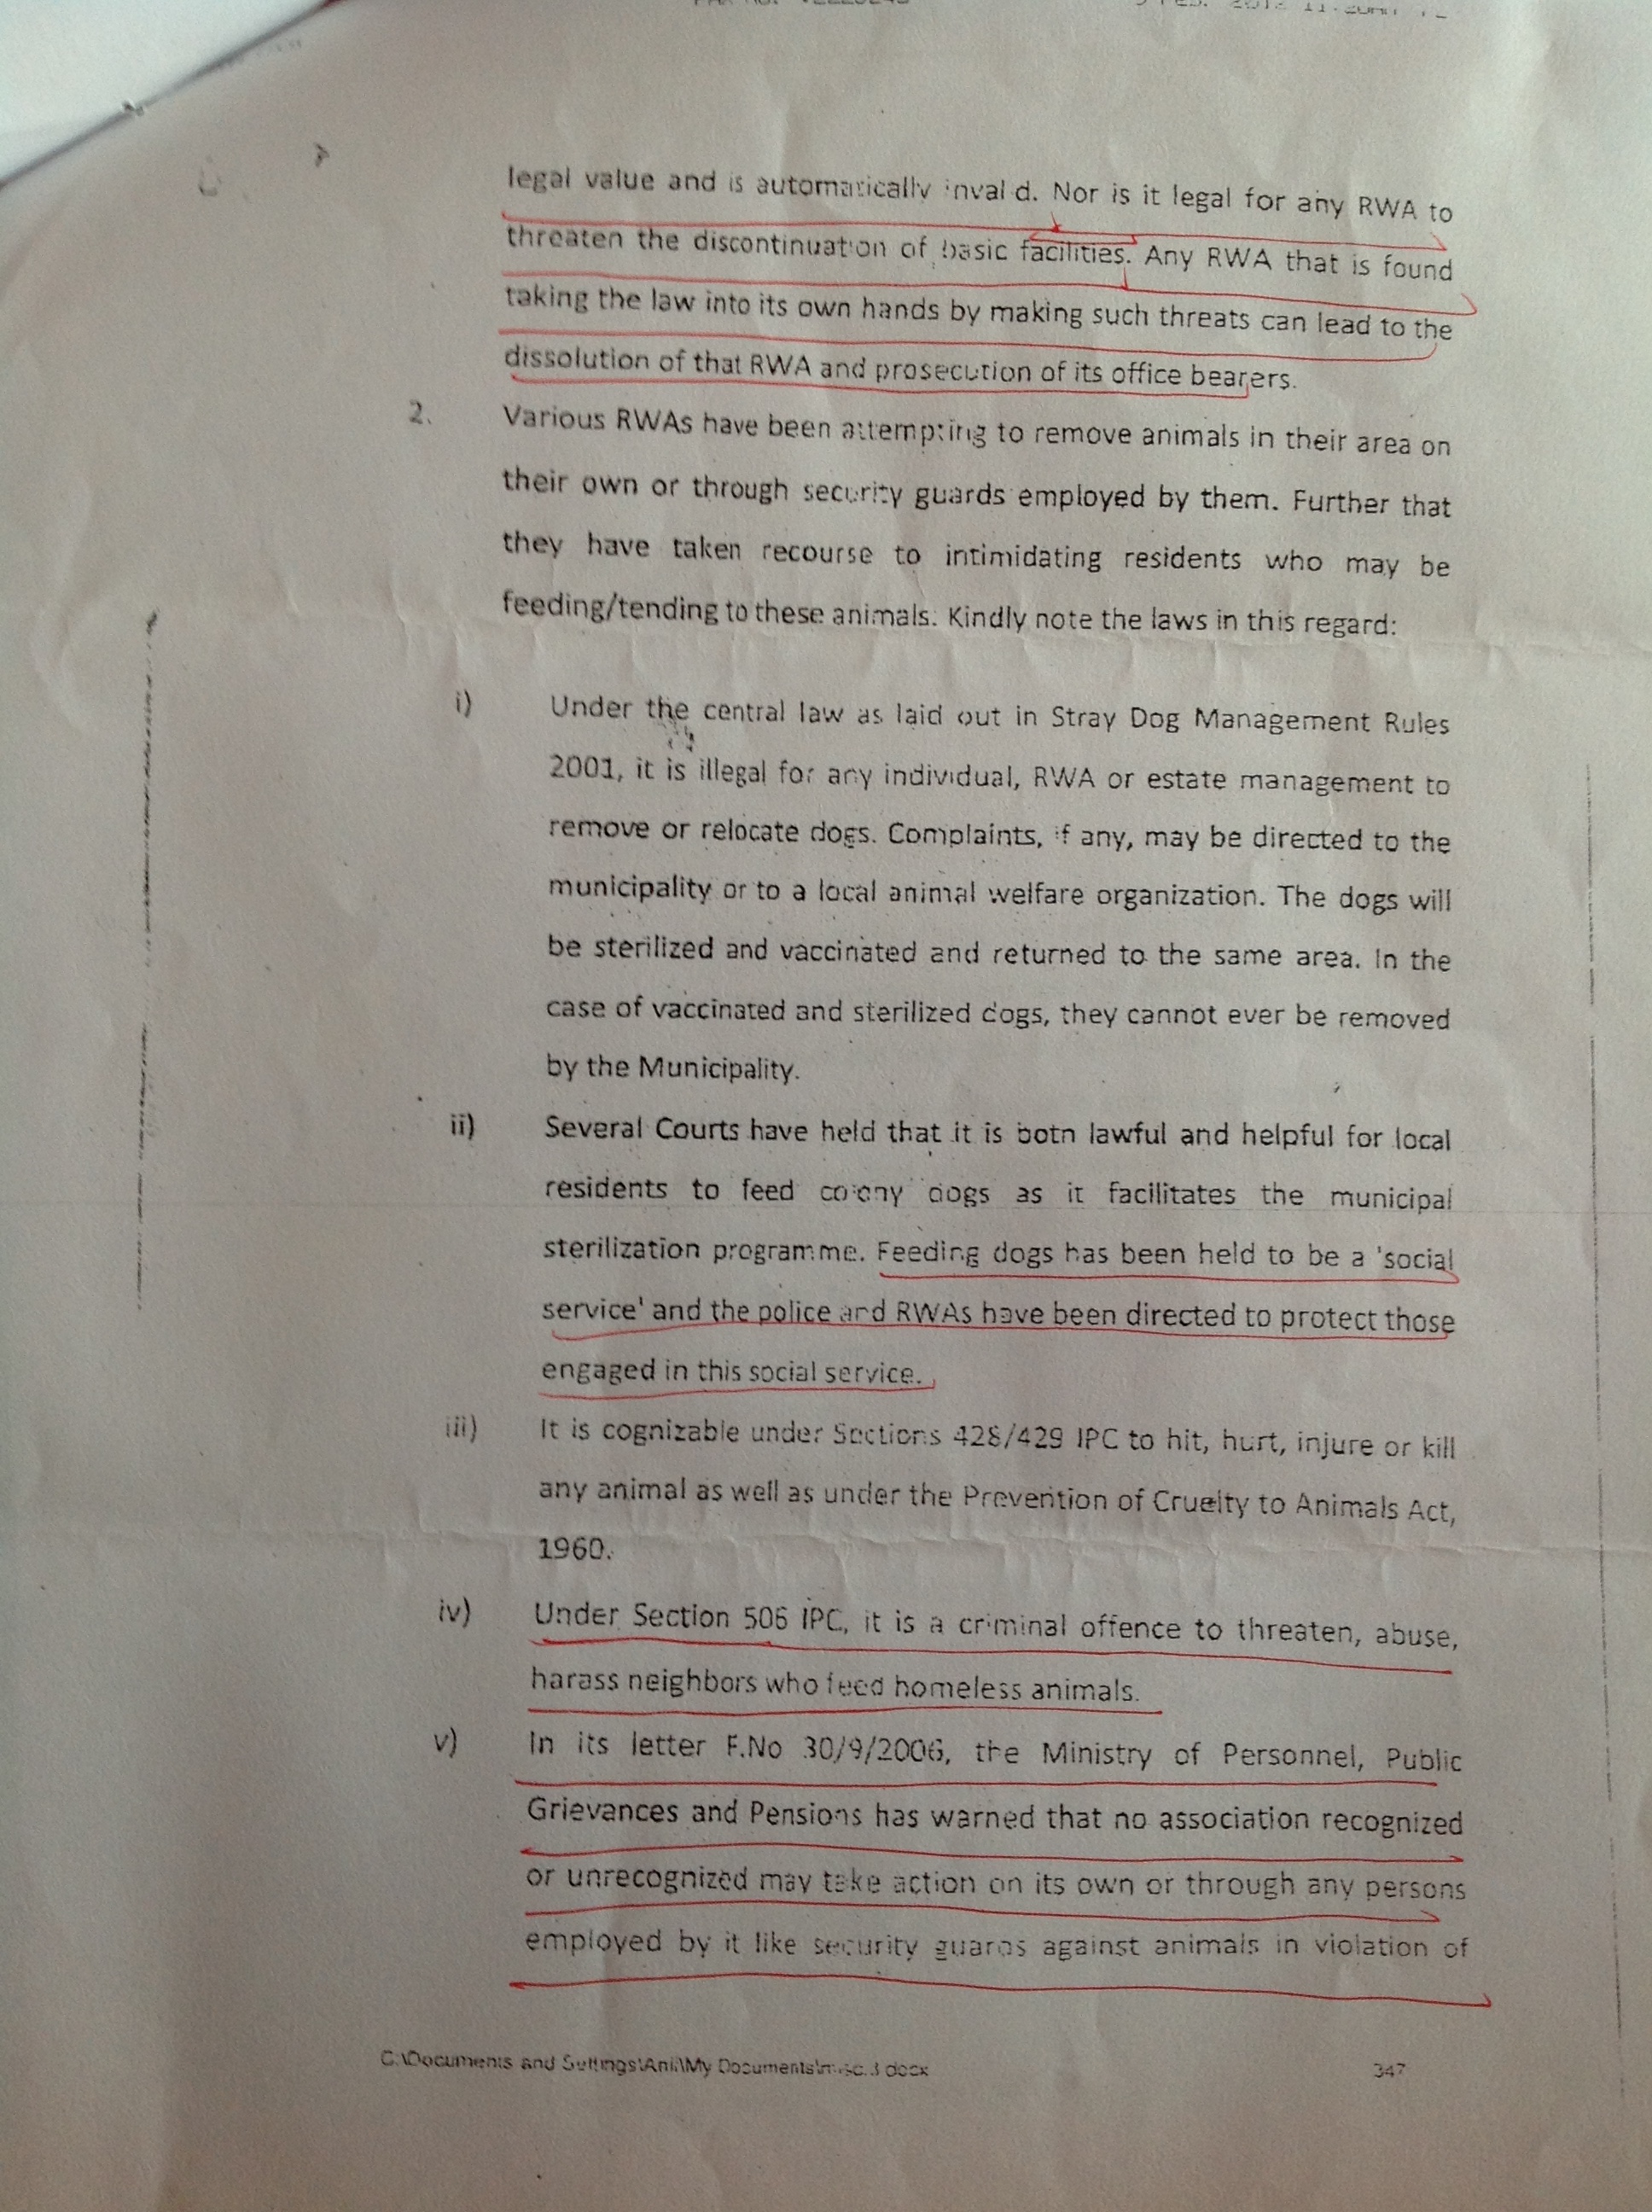 Gurgaon-Municipal-Corporation-Directive-regarding-pet-dogs-and-stray-dogs_2012_Page 2